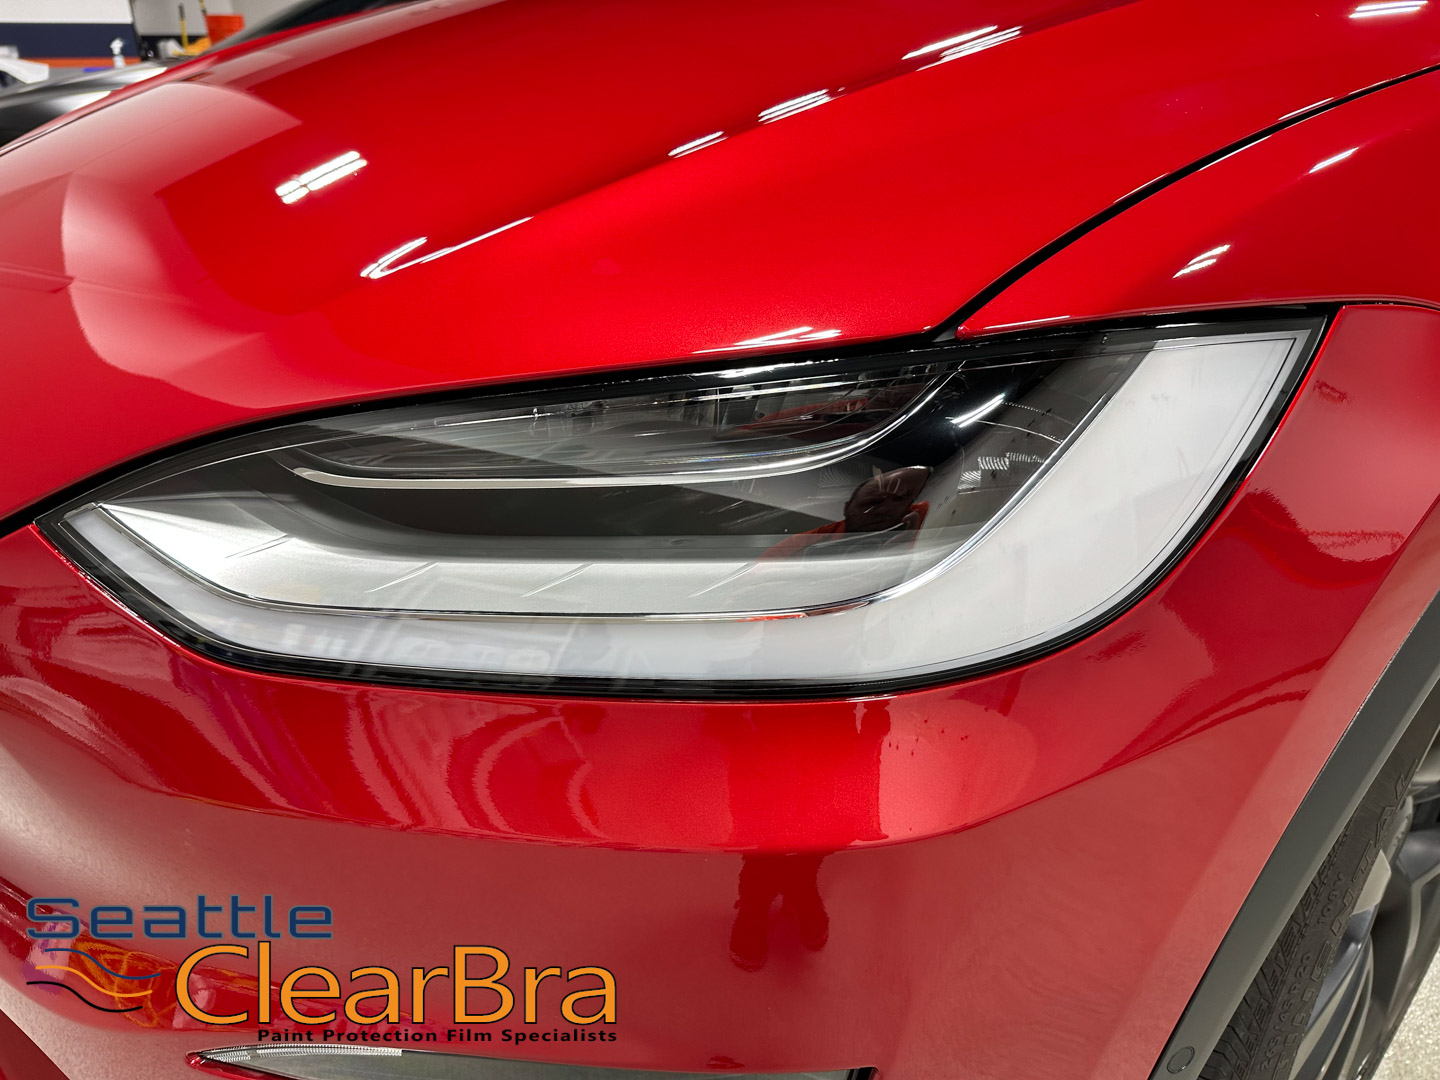 seattle-clearbra-tesla-model-x-xpel-ultimate-fusion-redmond-clear-bra-ppf-paint-protection-fil...jpg